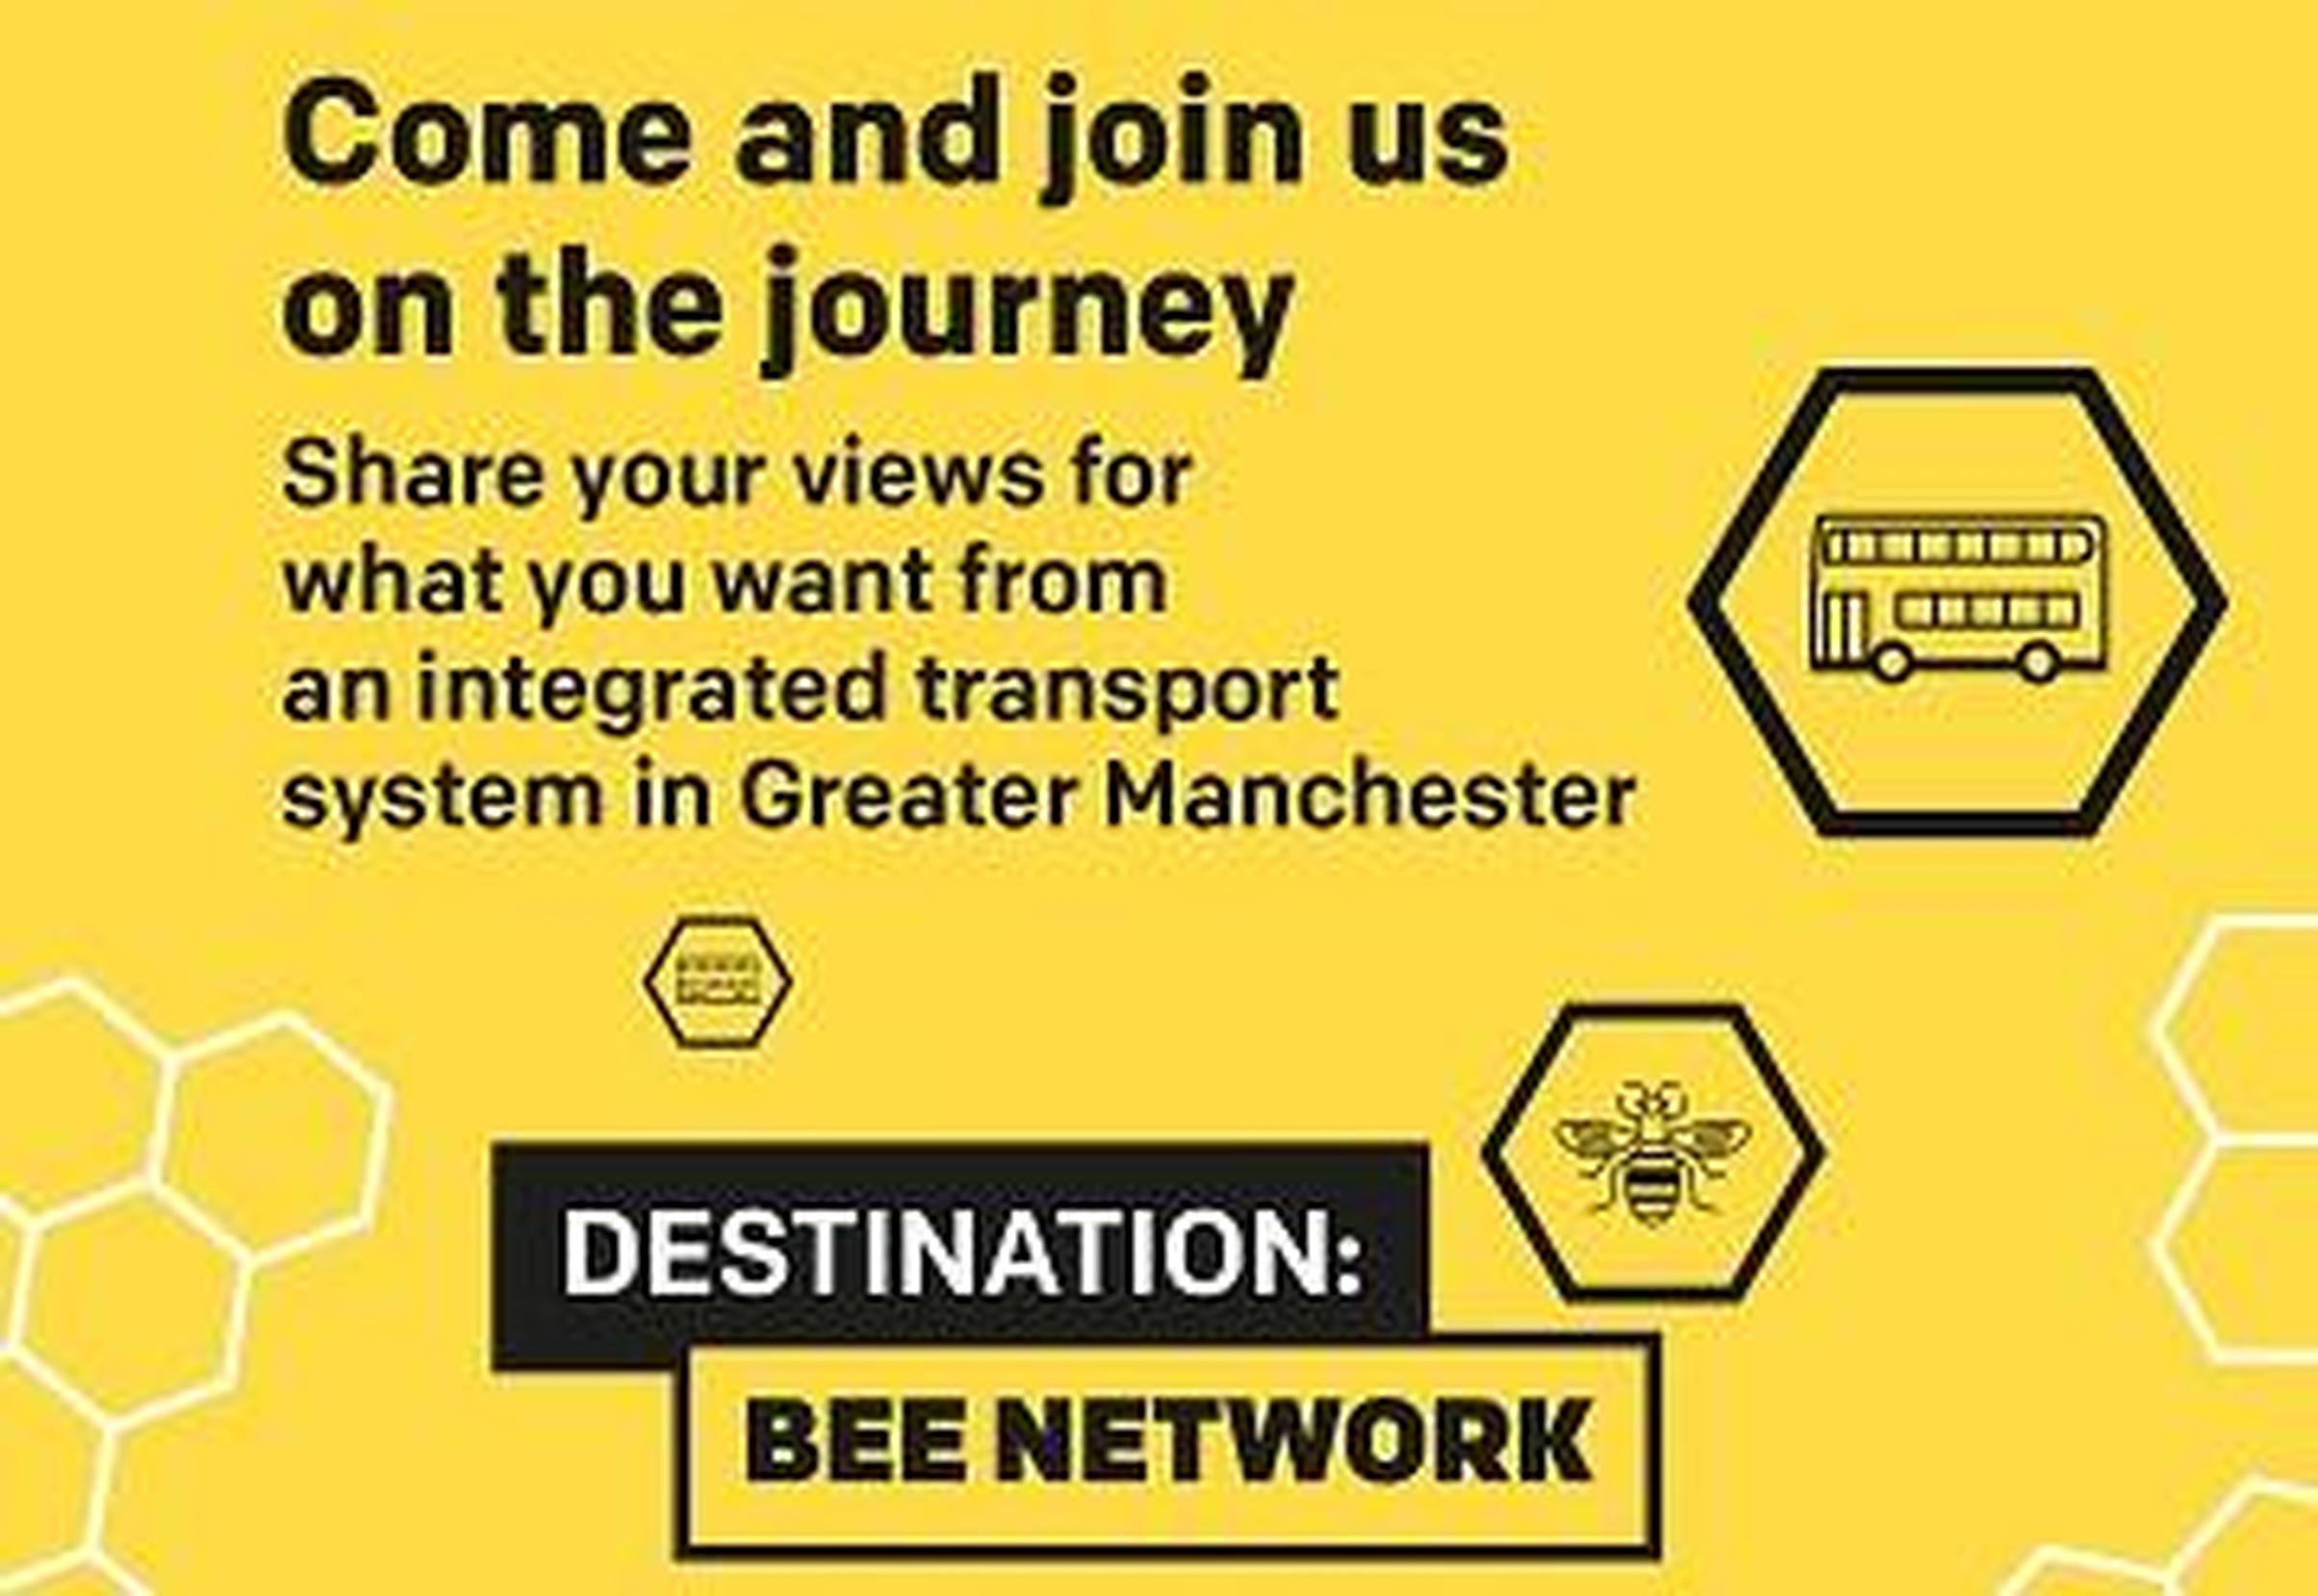 TfGM to press ahead with its plans to introduce the Bee Network across Greater Manchester in September